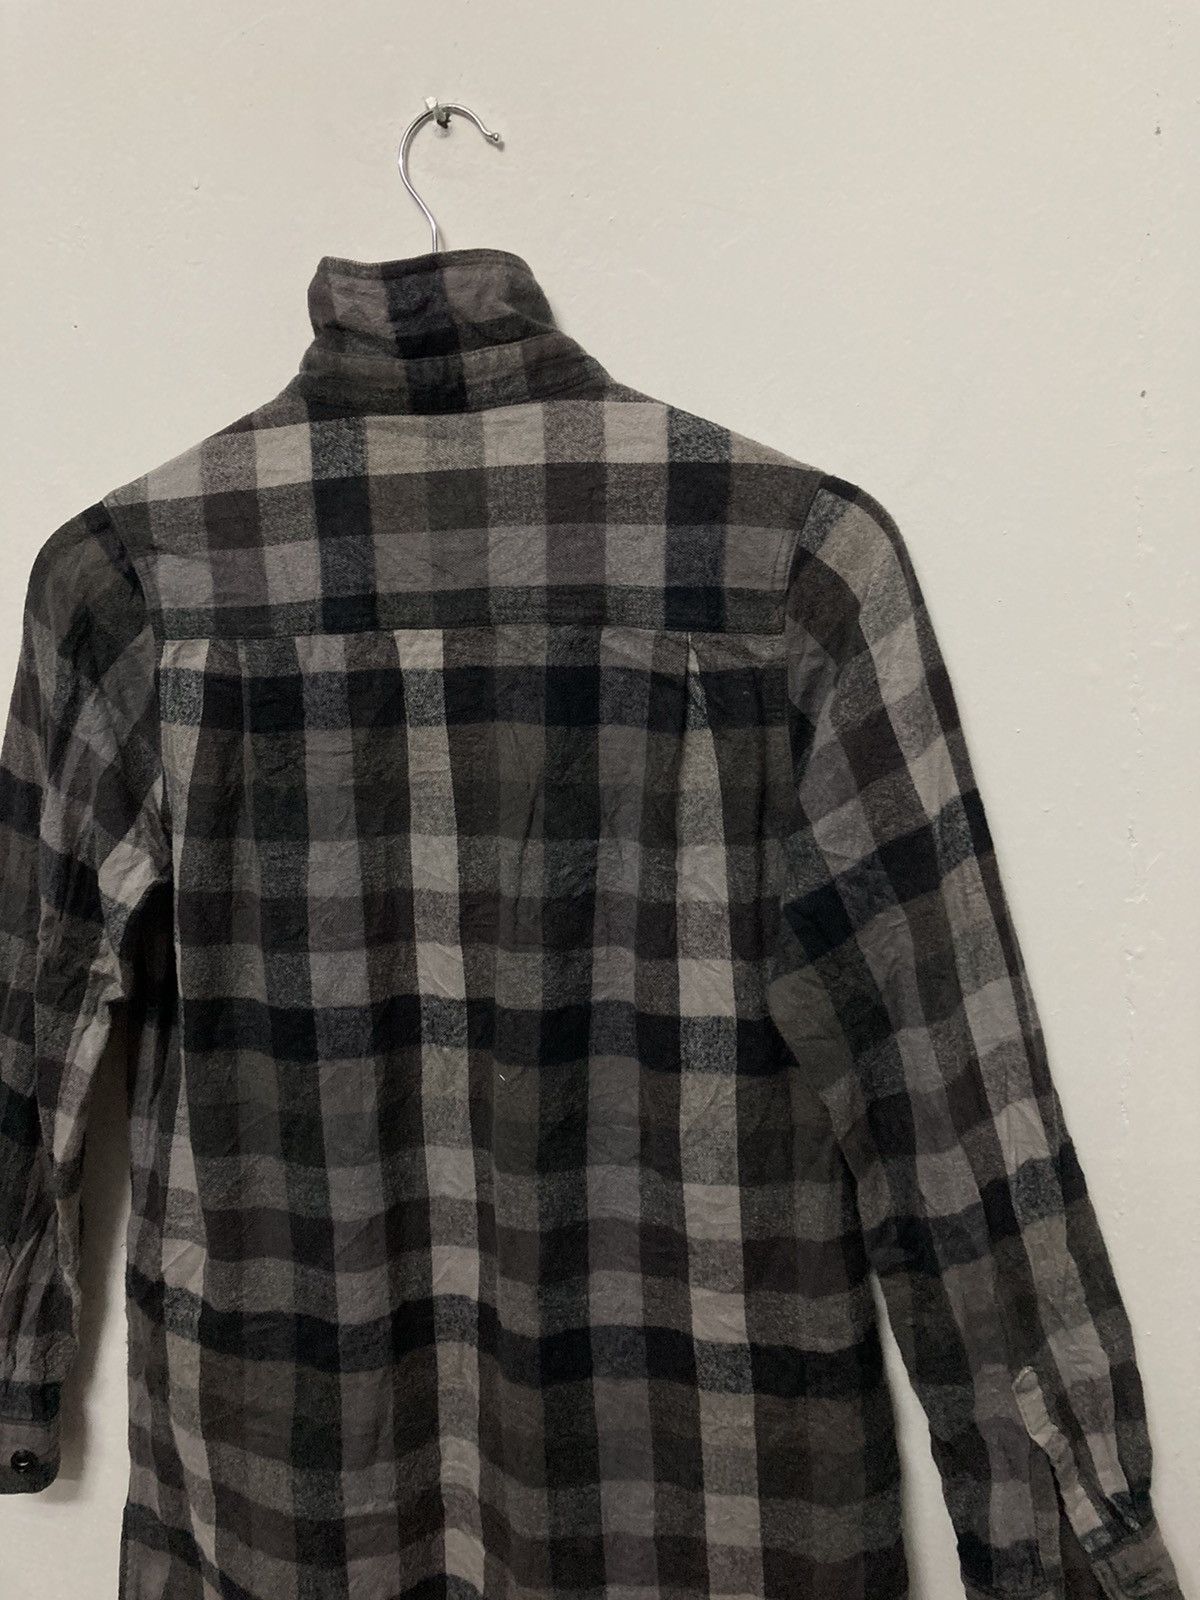 Bape Button Up Checker Flannel Shirt Made in Japan - 8